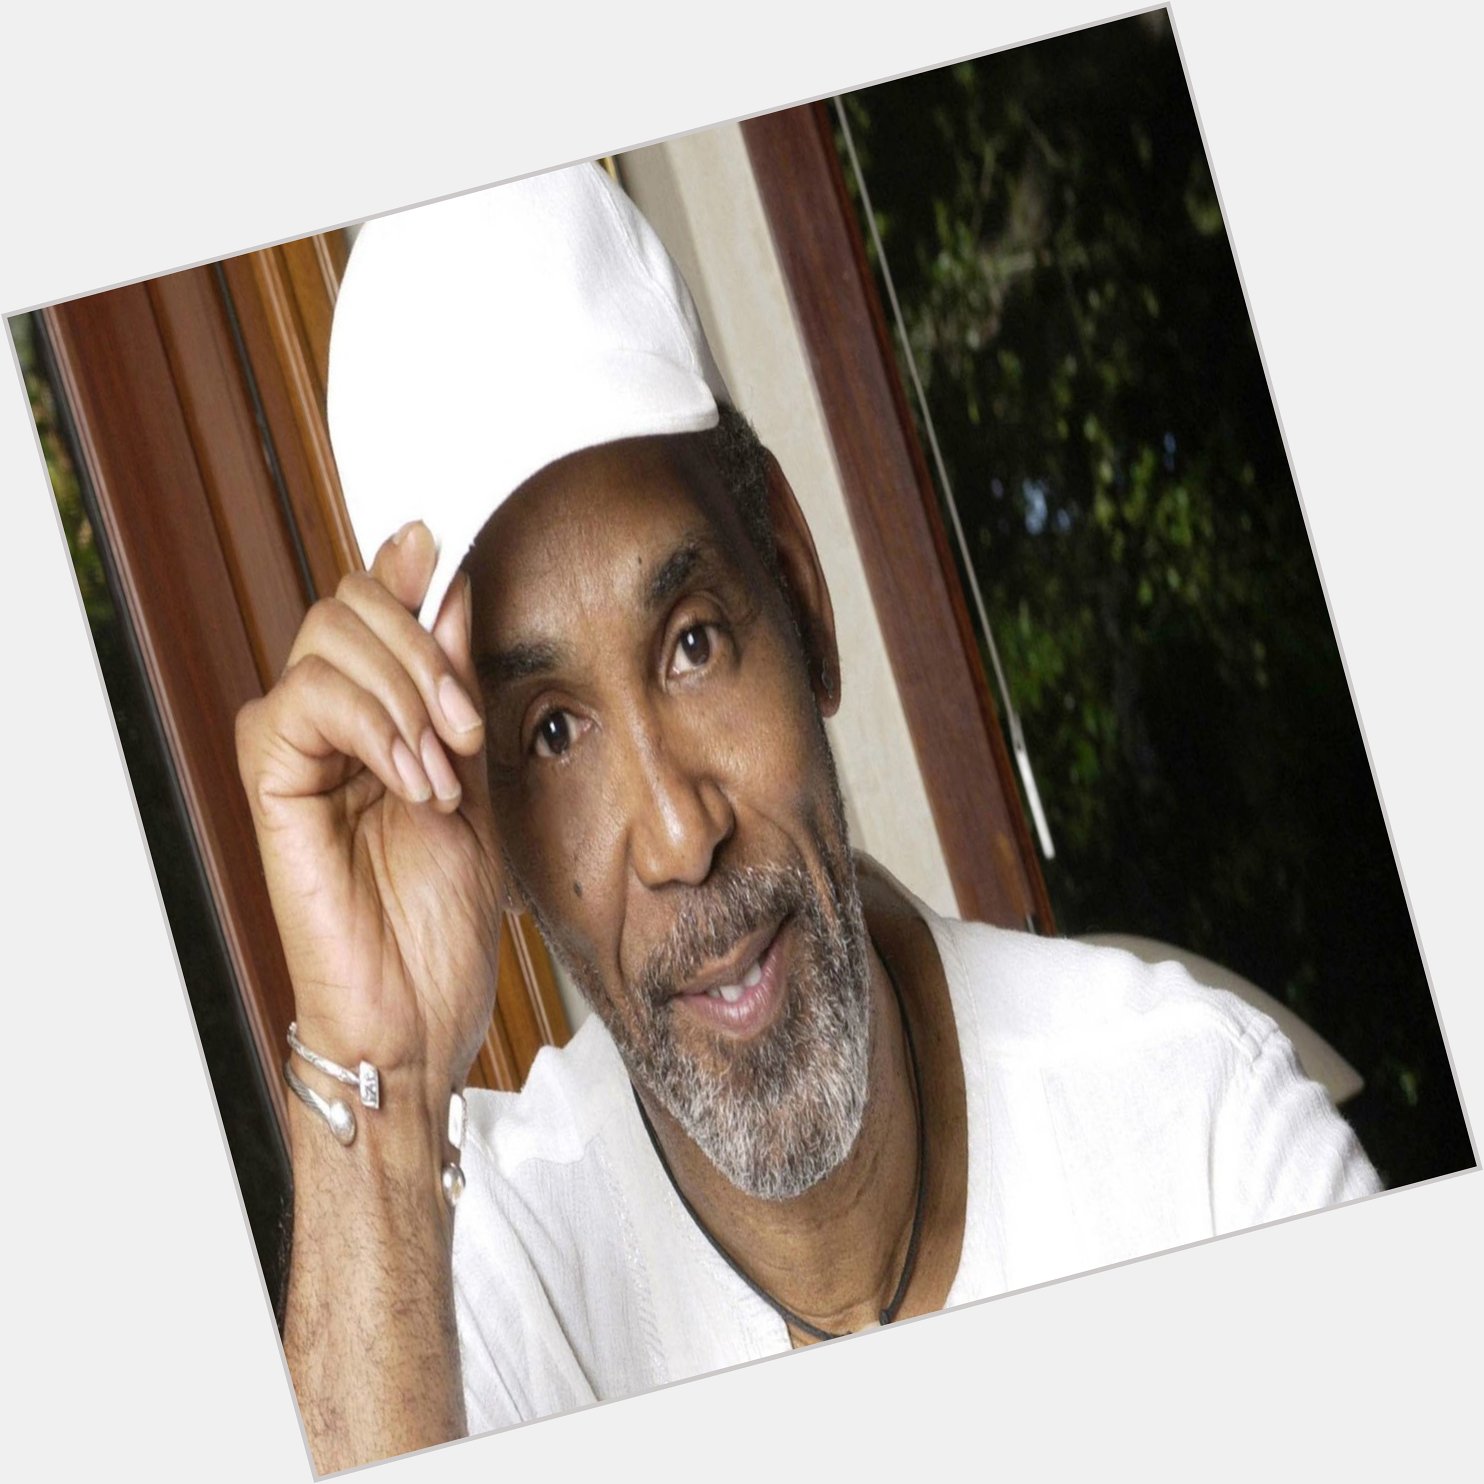 A true music legend and Louisiana favorite Frankie Beverly is 75 years young! Happy Birthday! 